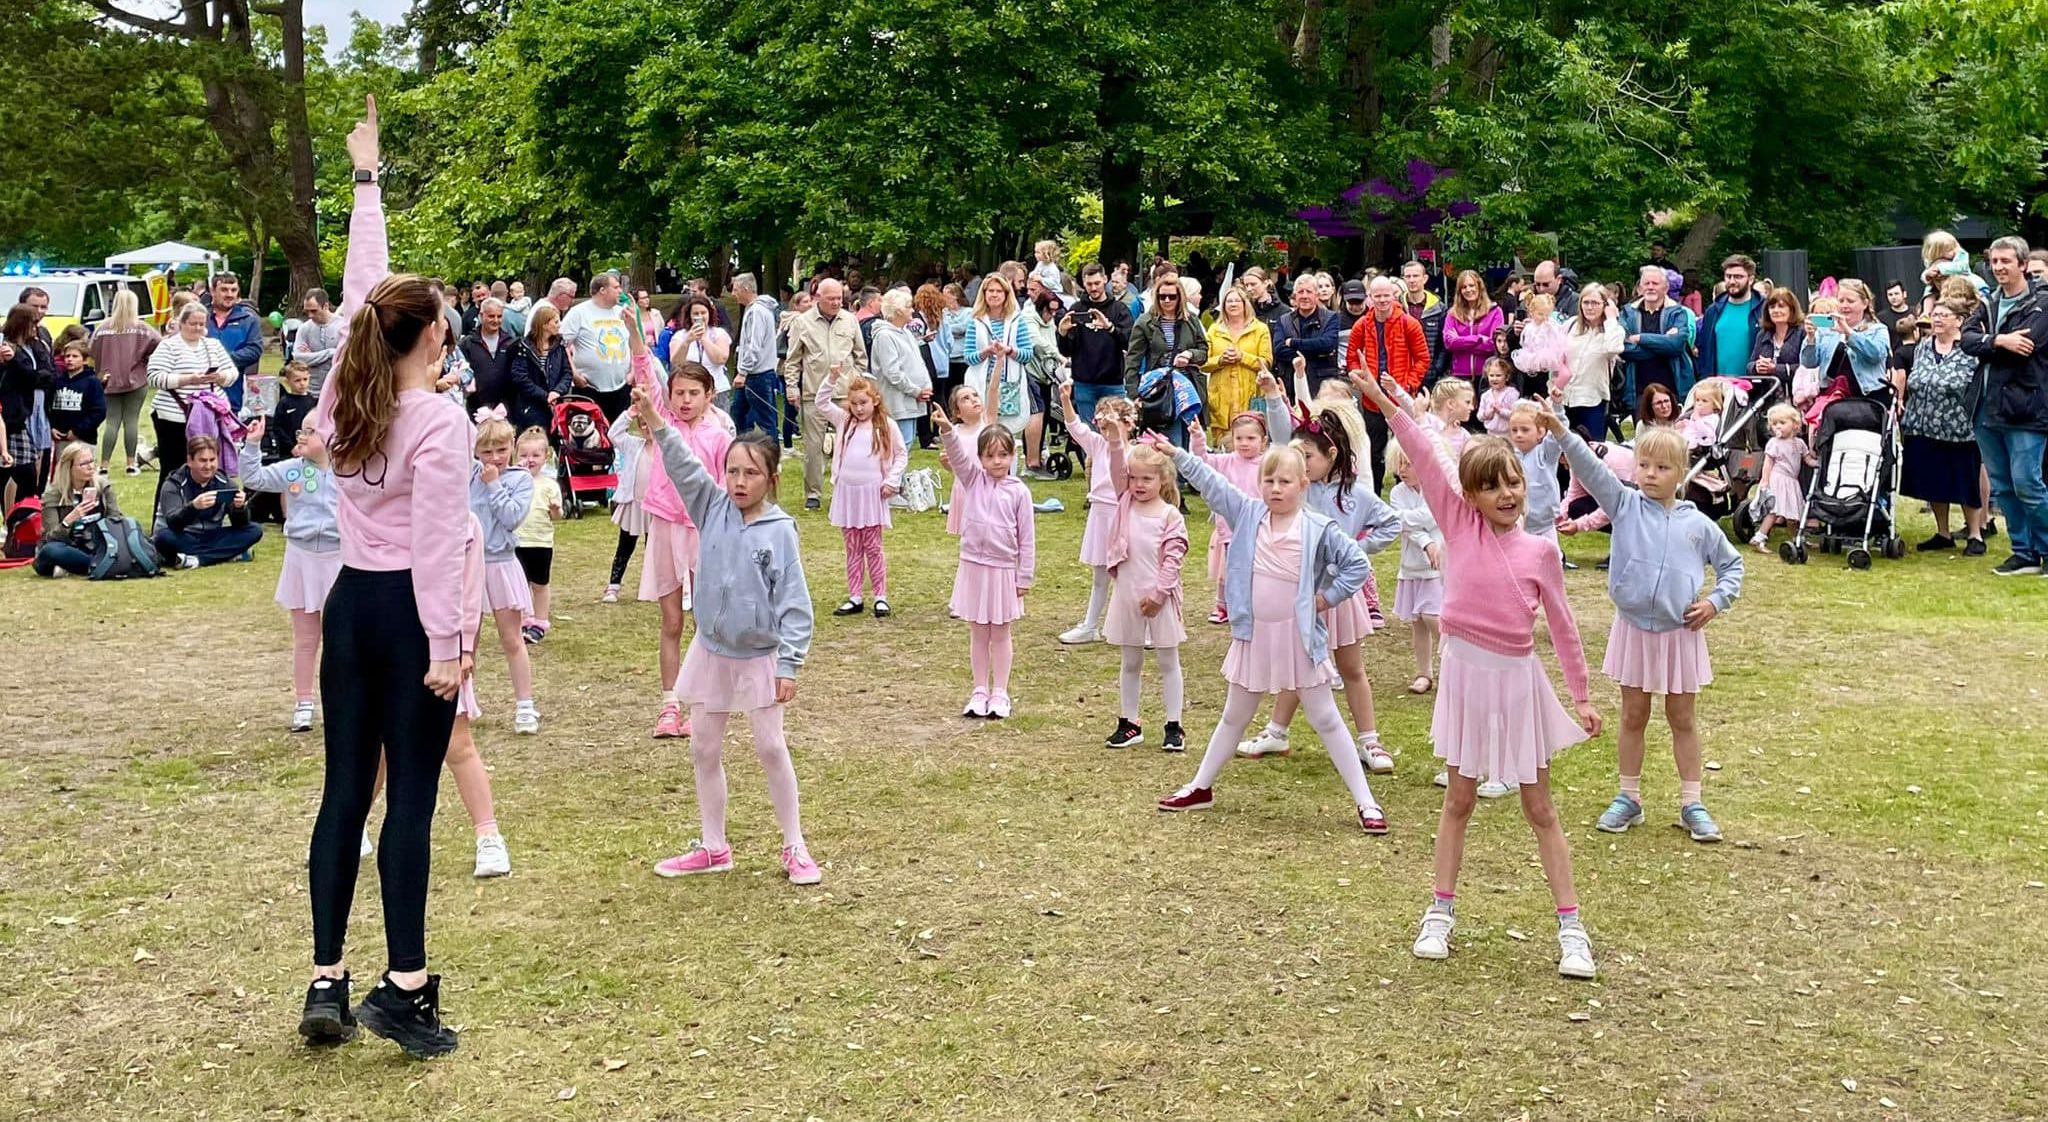 Thousands of people enjoyed a Family Fun Day at the Botanic Gardens in Churchtown in Southport. Children from DBA School of Dance and Babyballet entertained watching crowds. Photo by Andrew Brown Media